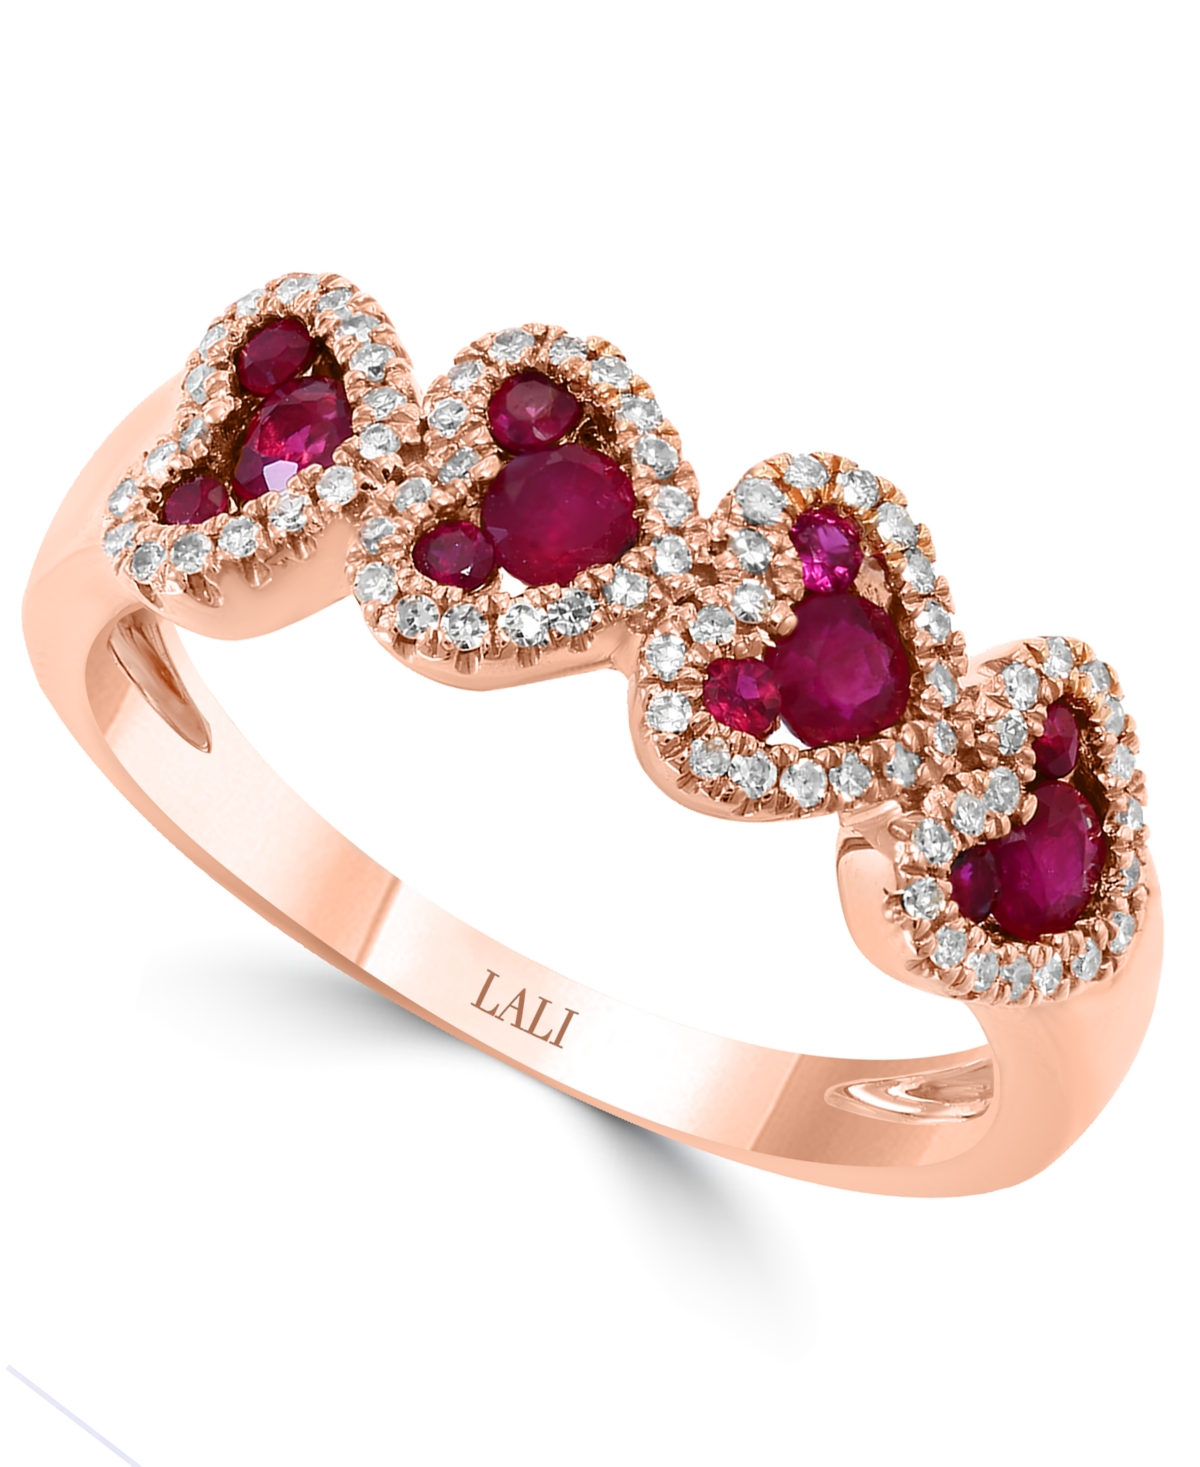 Ruby (5/8 ct. t.w.) & Diamond (1/5 ct. t.w.) Heart Ring in 14k Rose Gold (Also available in Sapphire) - Ruby